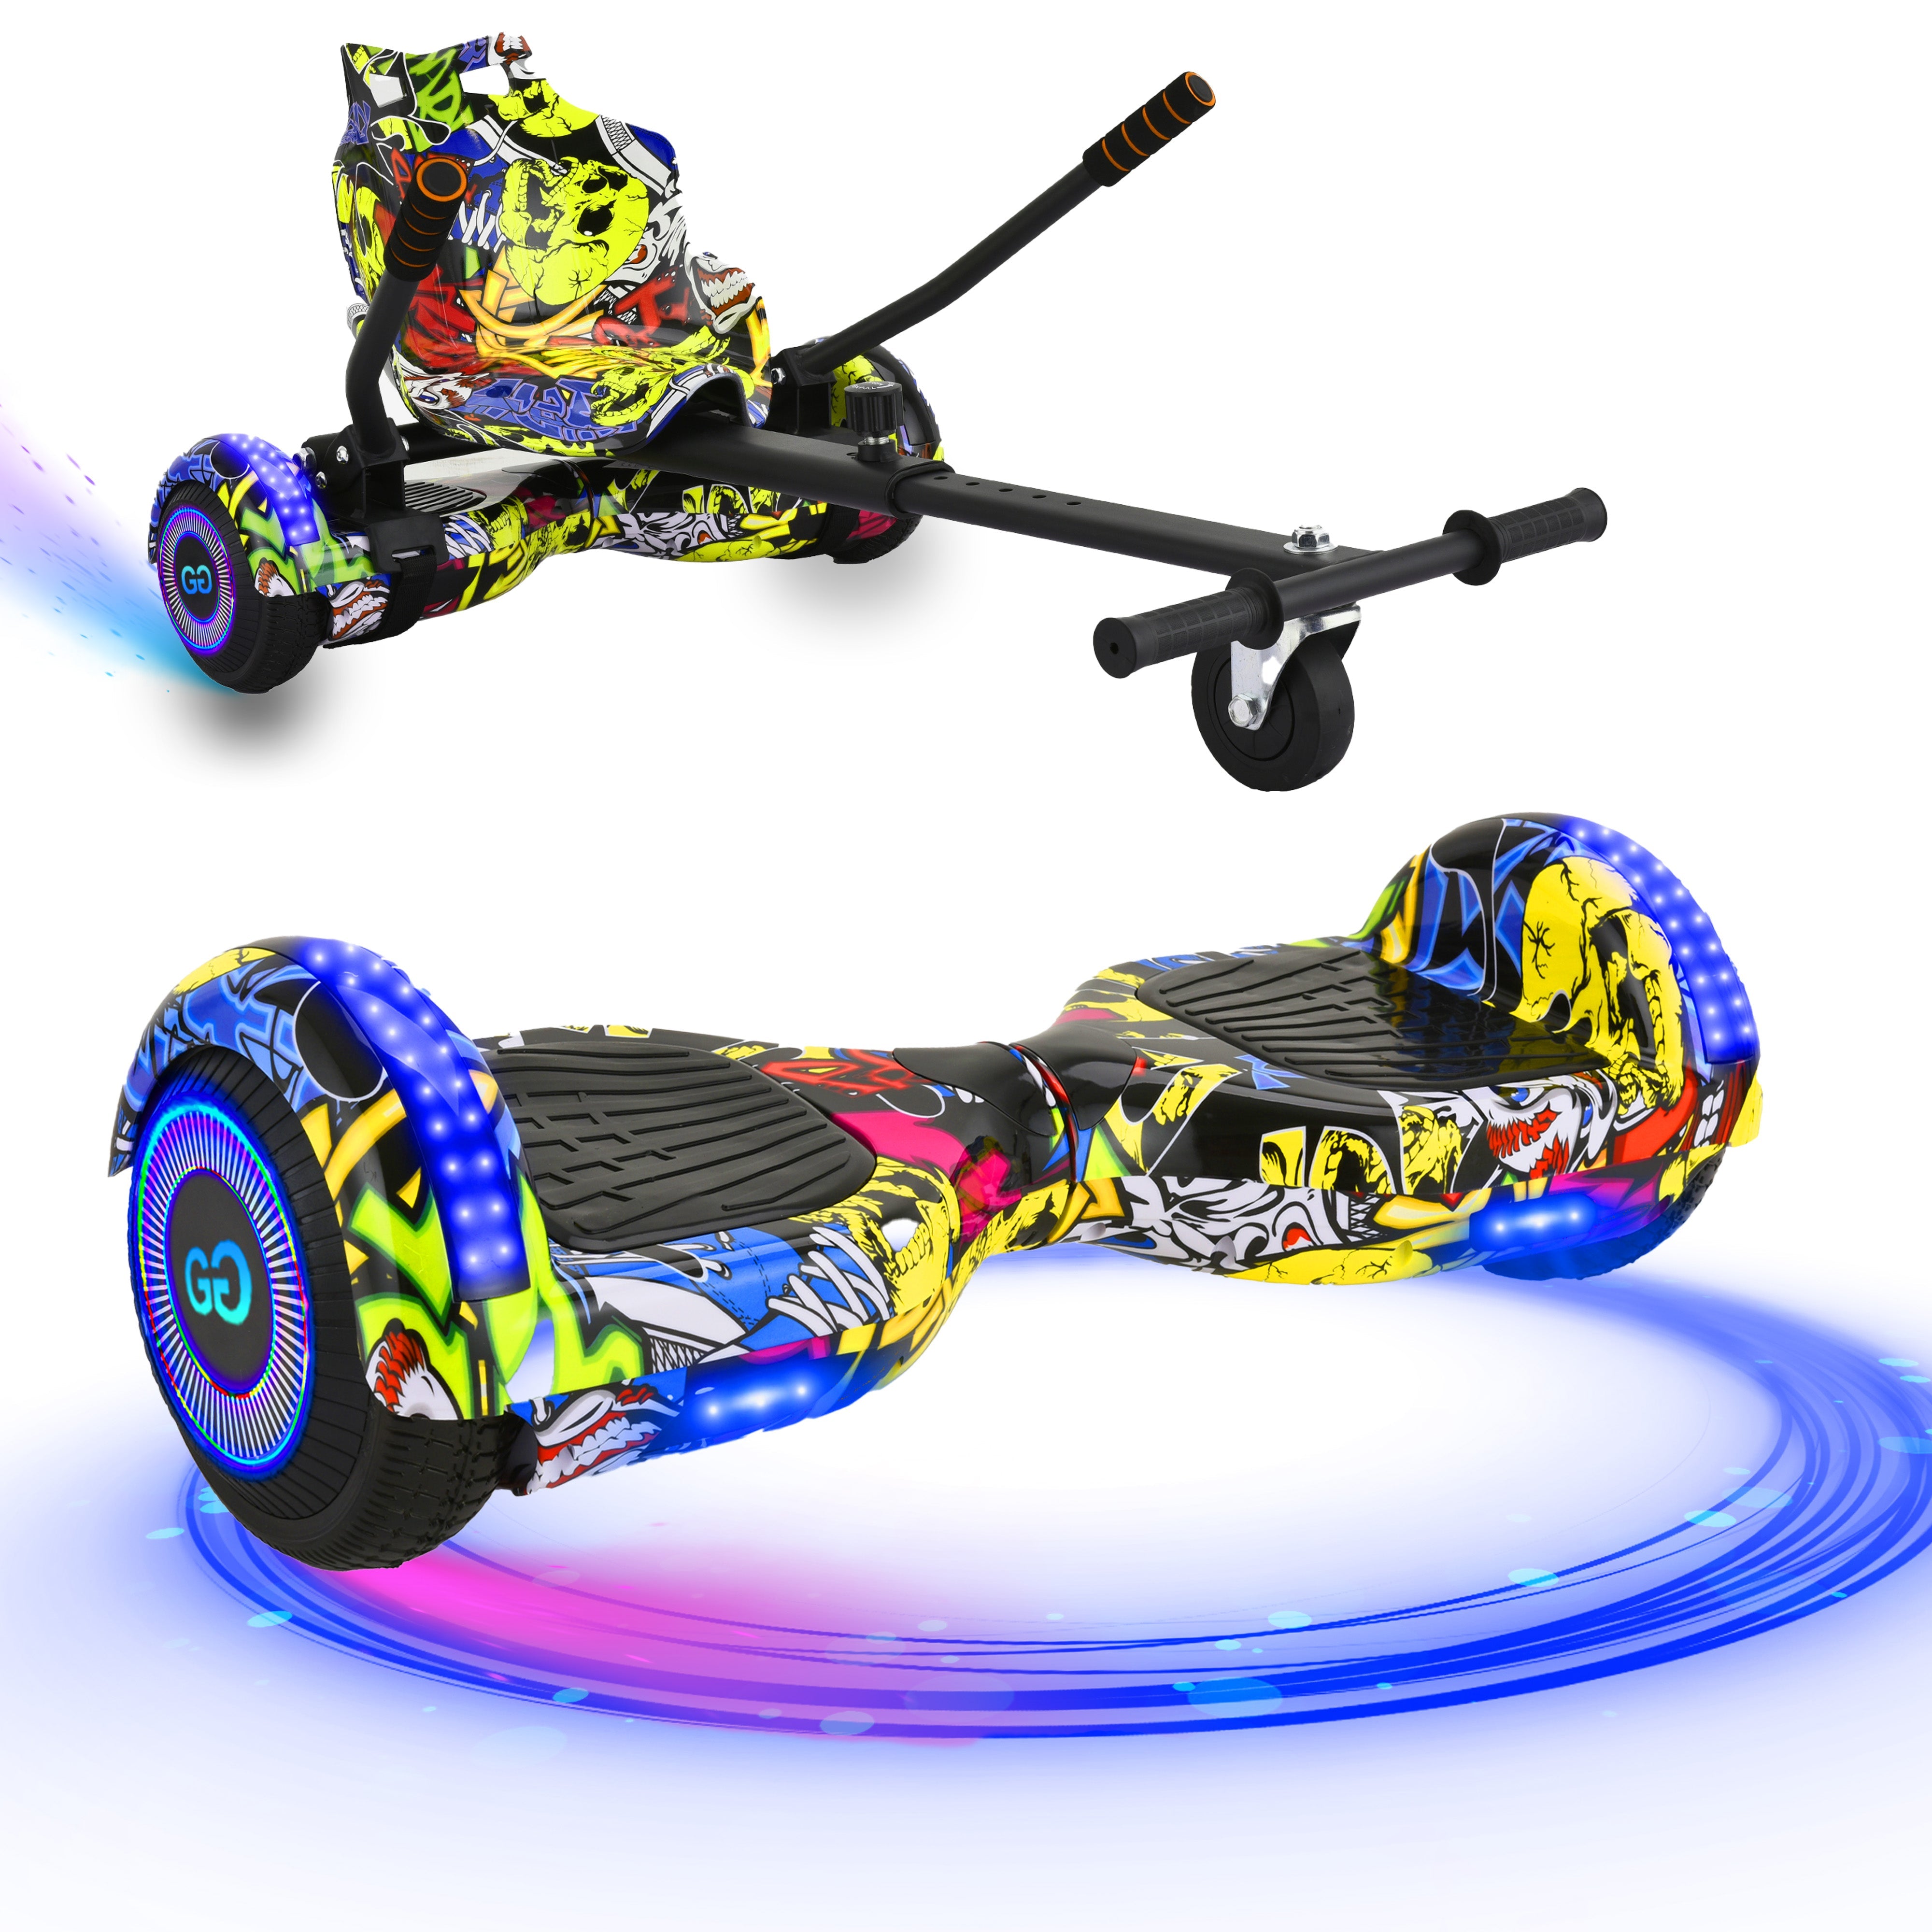 Hoverboard (G1) with Graffiti Yellow design and LED lights, attached to a Hoverkart with a matching patterned seat.